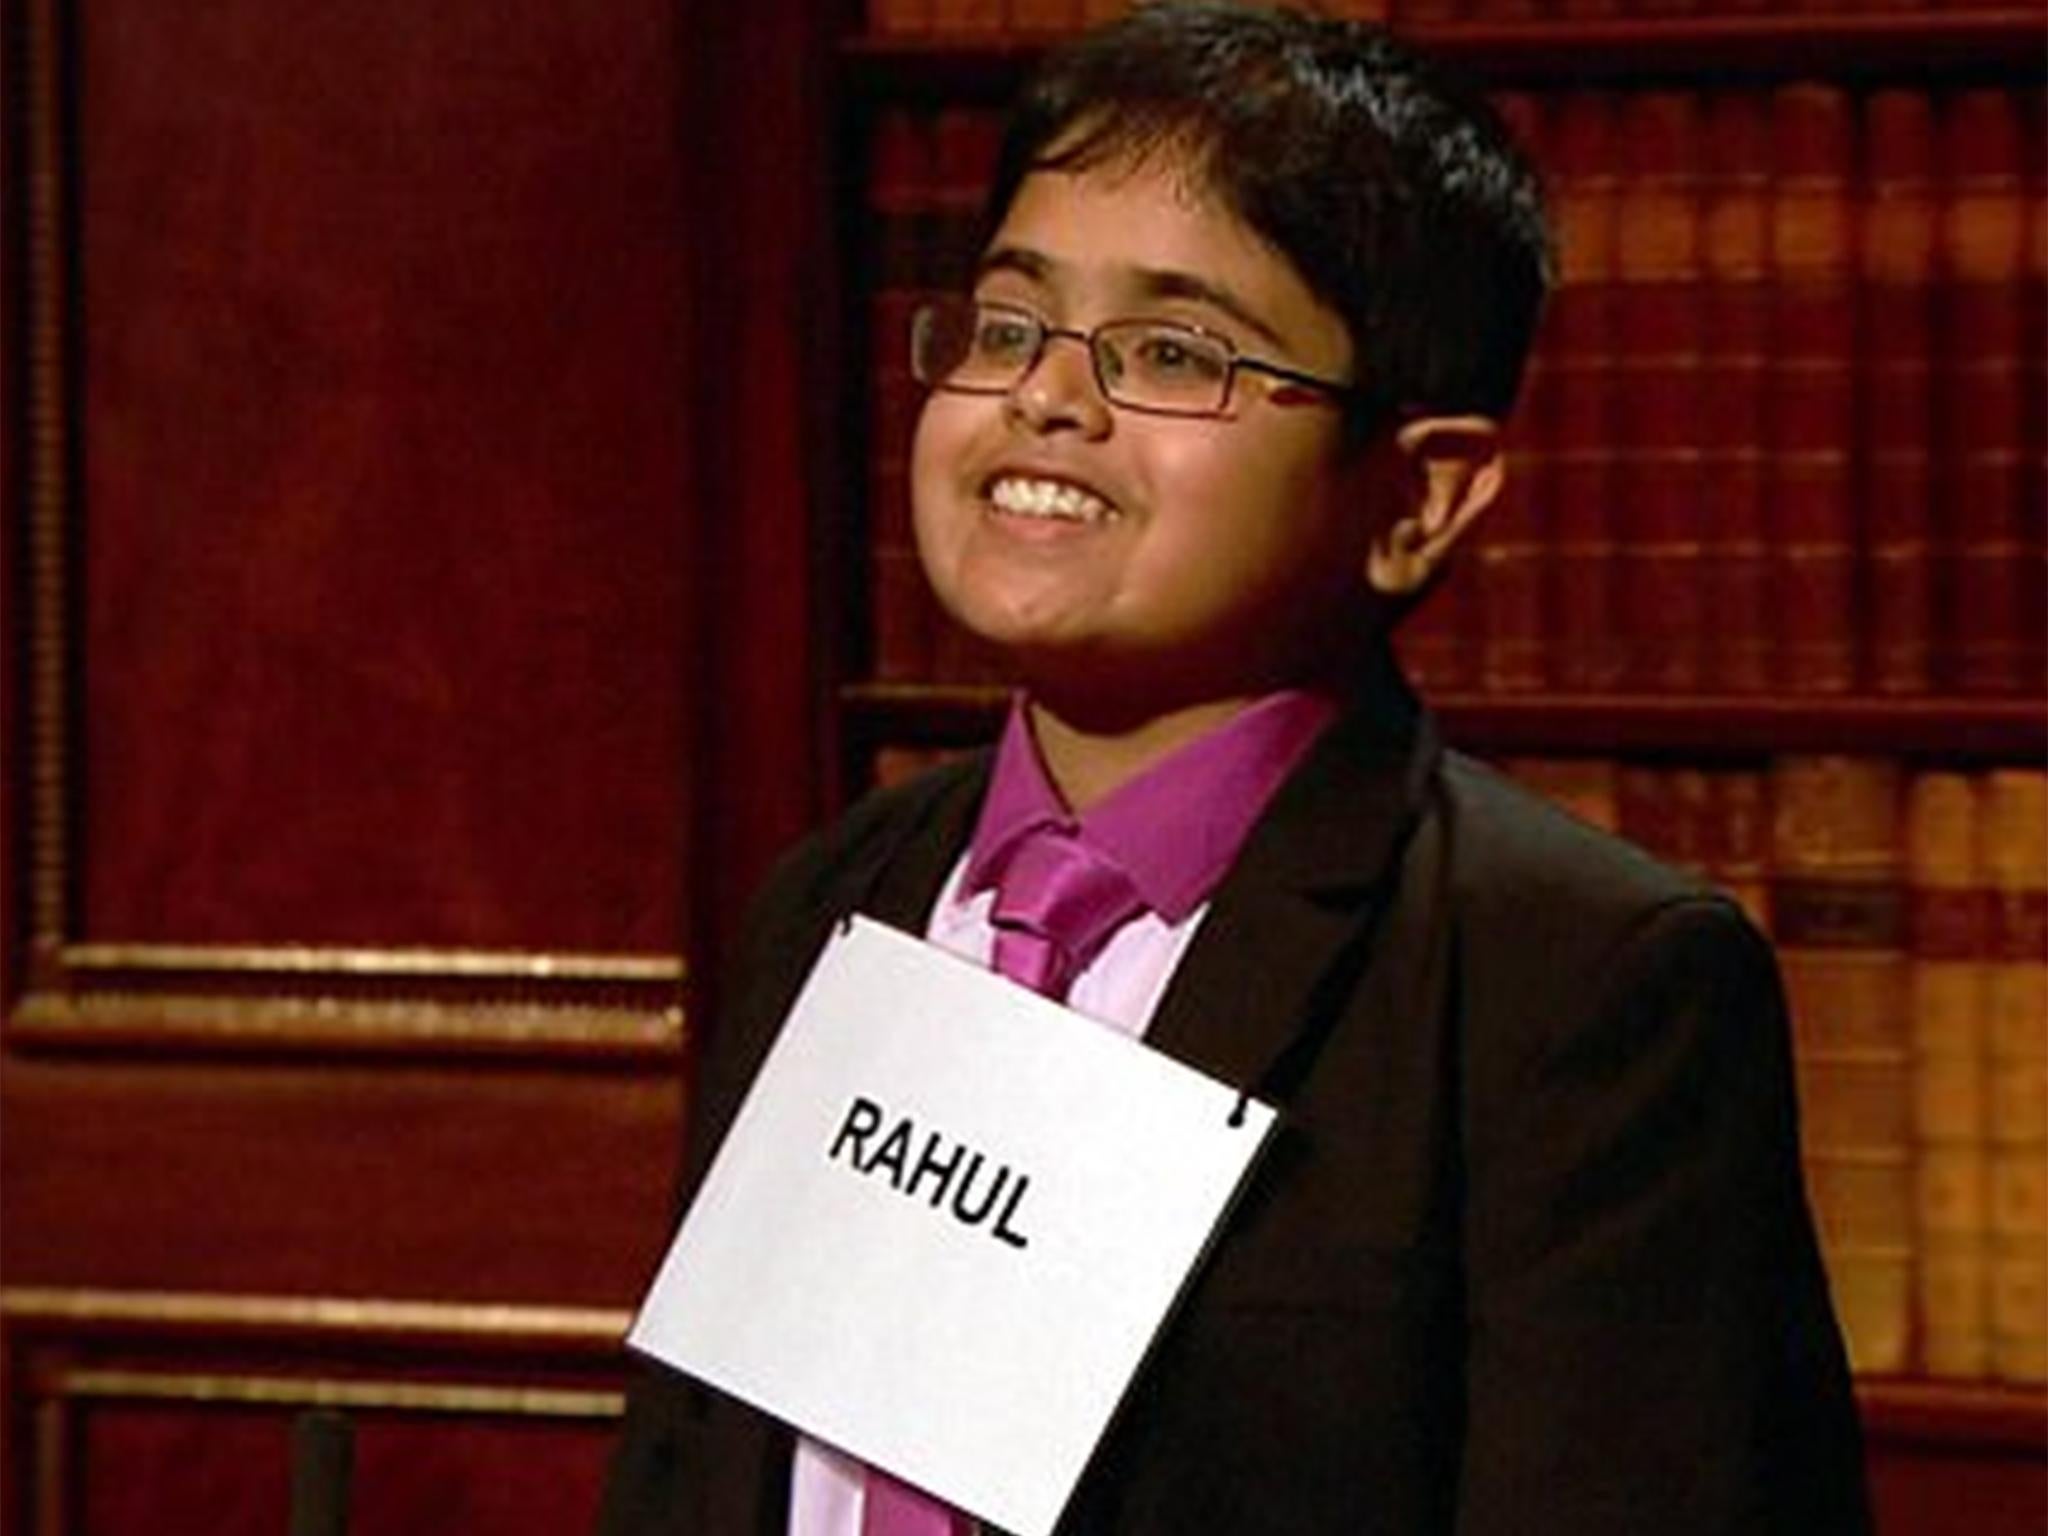 Rahul's father said the family were 'all achievers', highlighting that he had played table tennis for Barnet Council